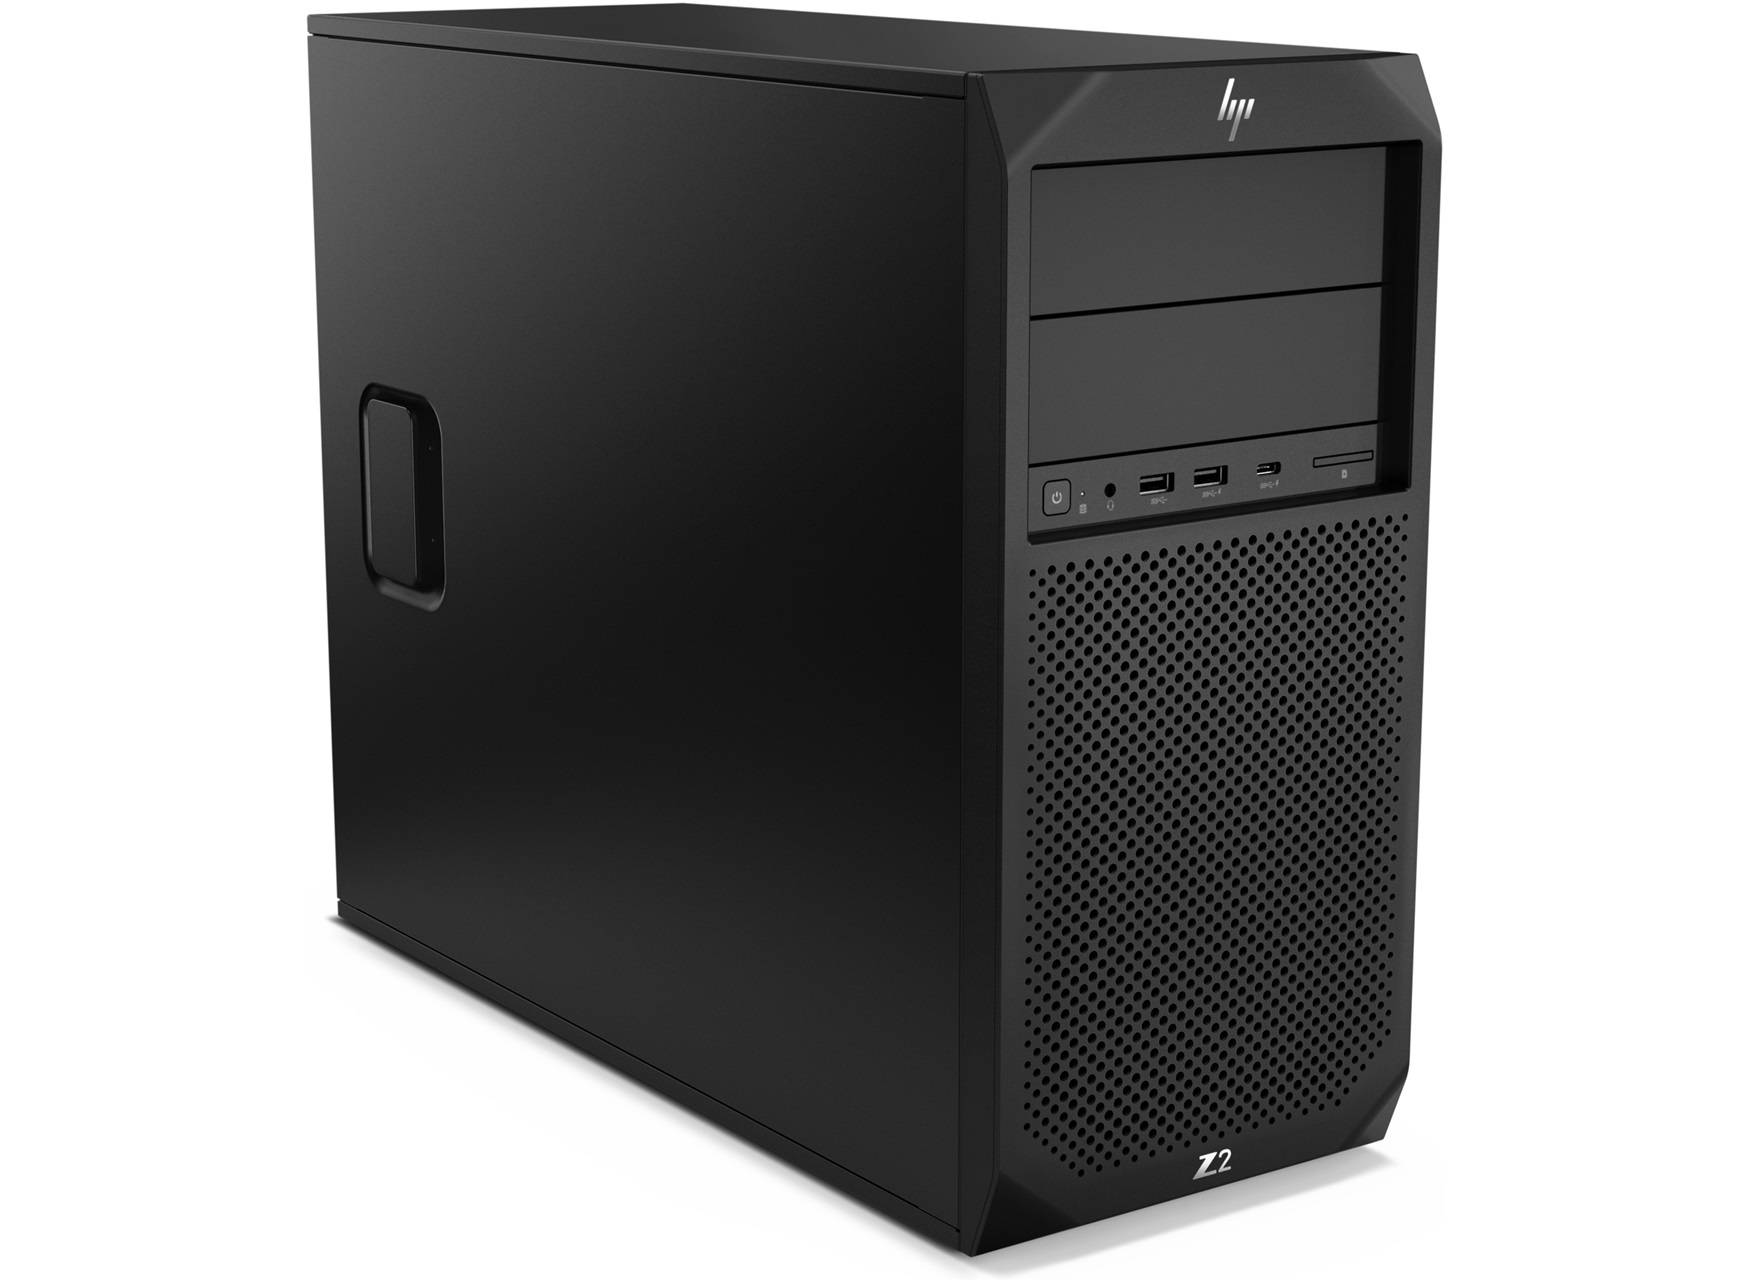 Commandant hoog commando EOL) HP Z2 G4 Tower Workstation PC (Core i9 / RTX 2080 Ti / 64GB / 512GB) -  Order at Unbound XR